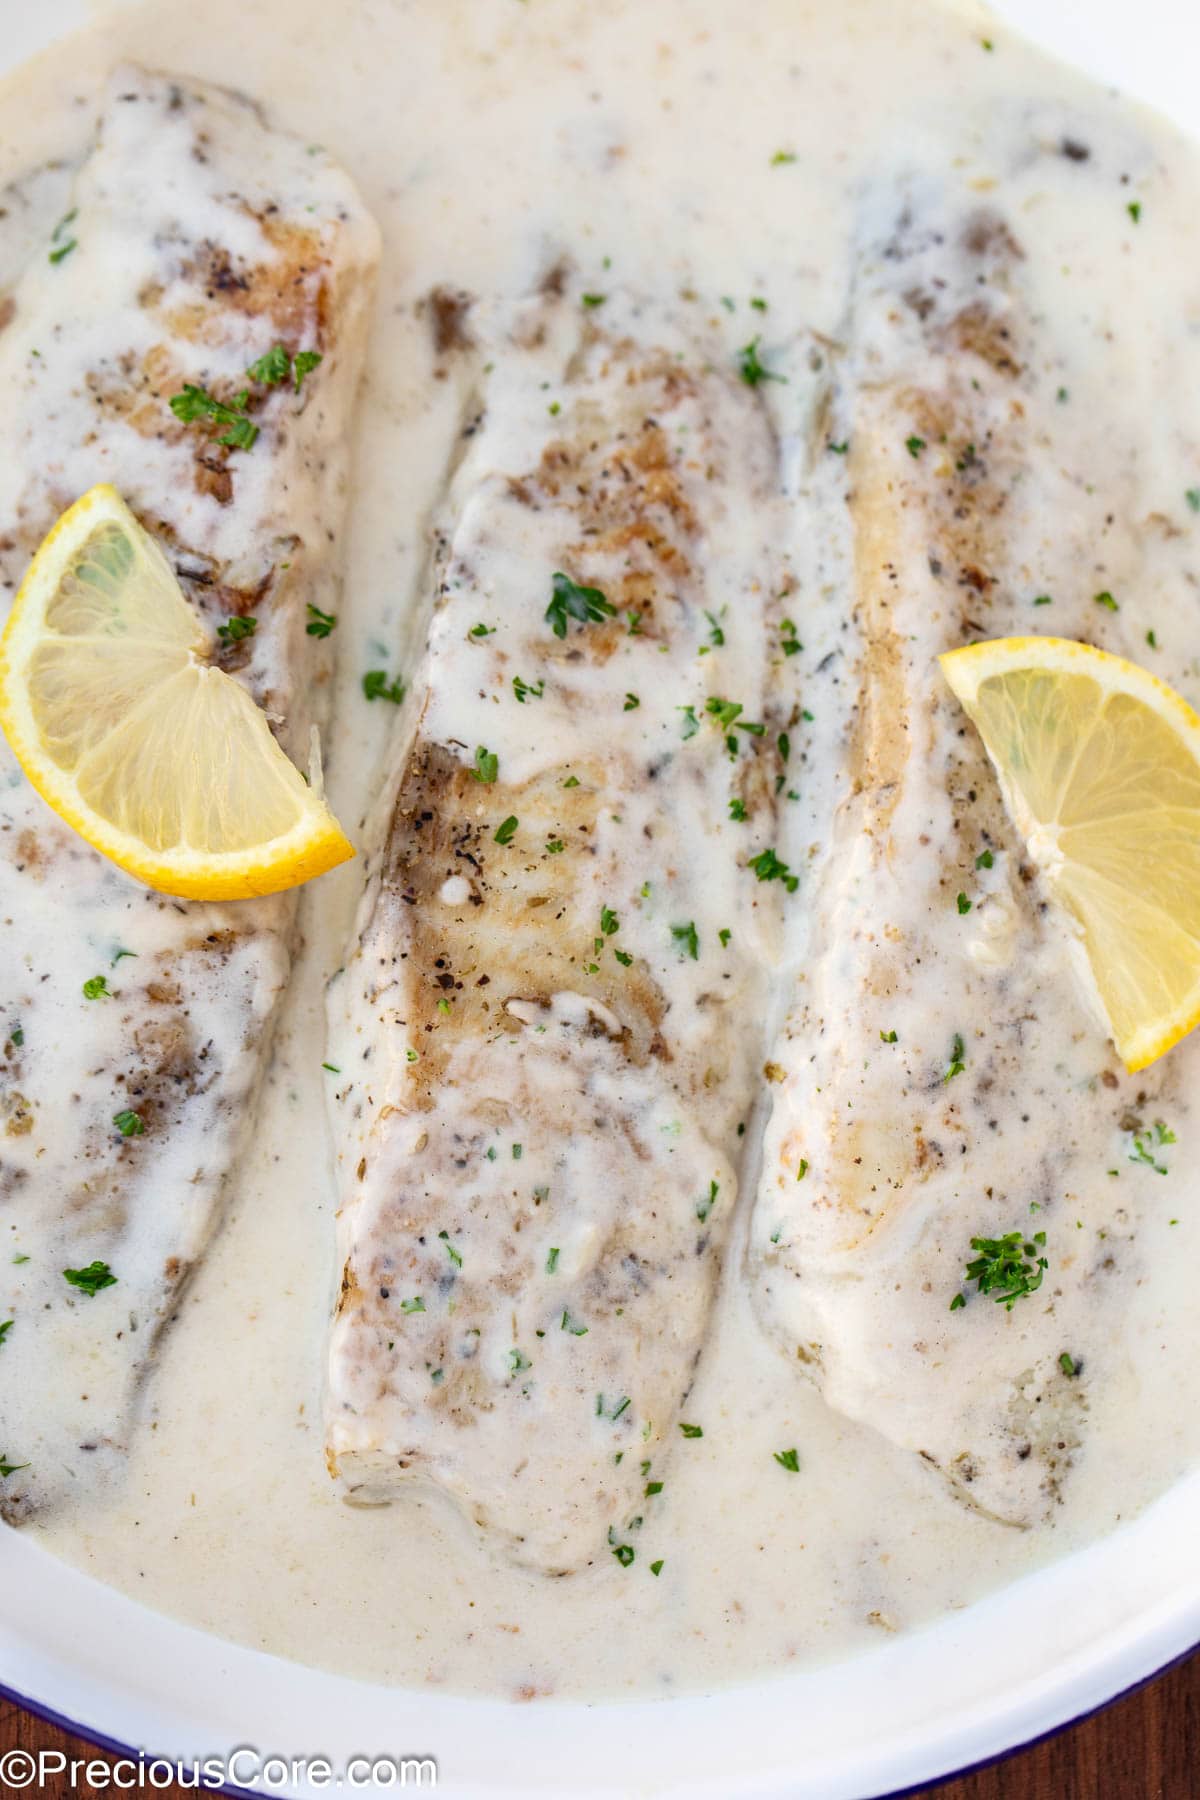 Cooked fish fillets in a skillet with white sauce.